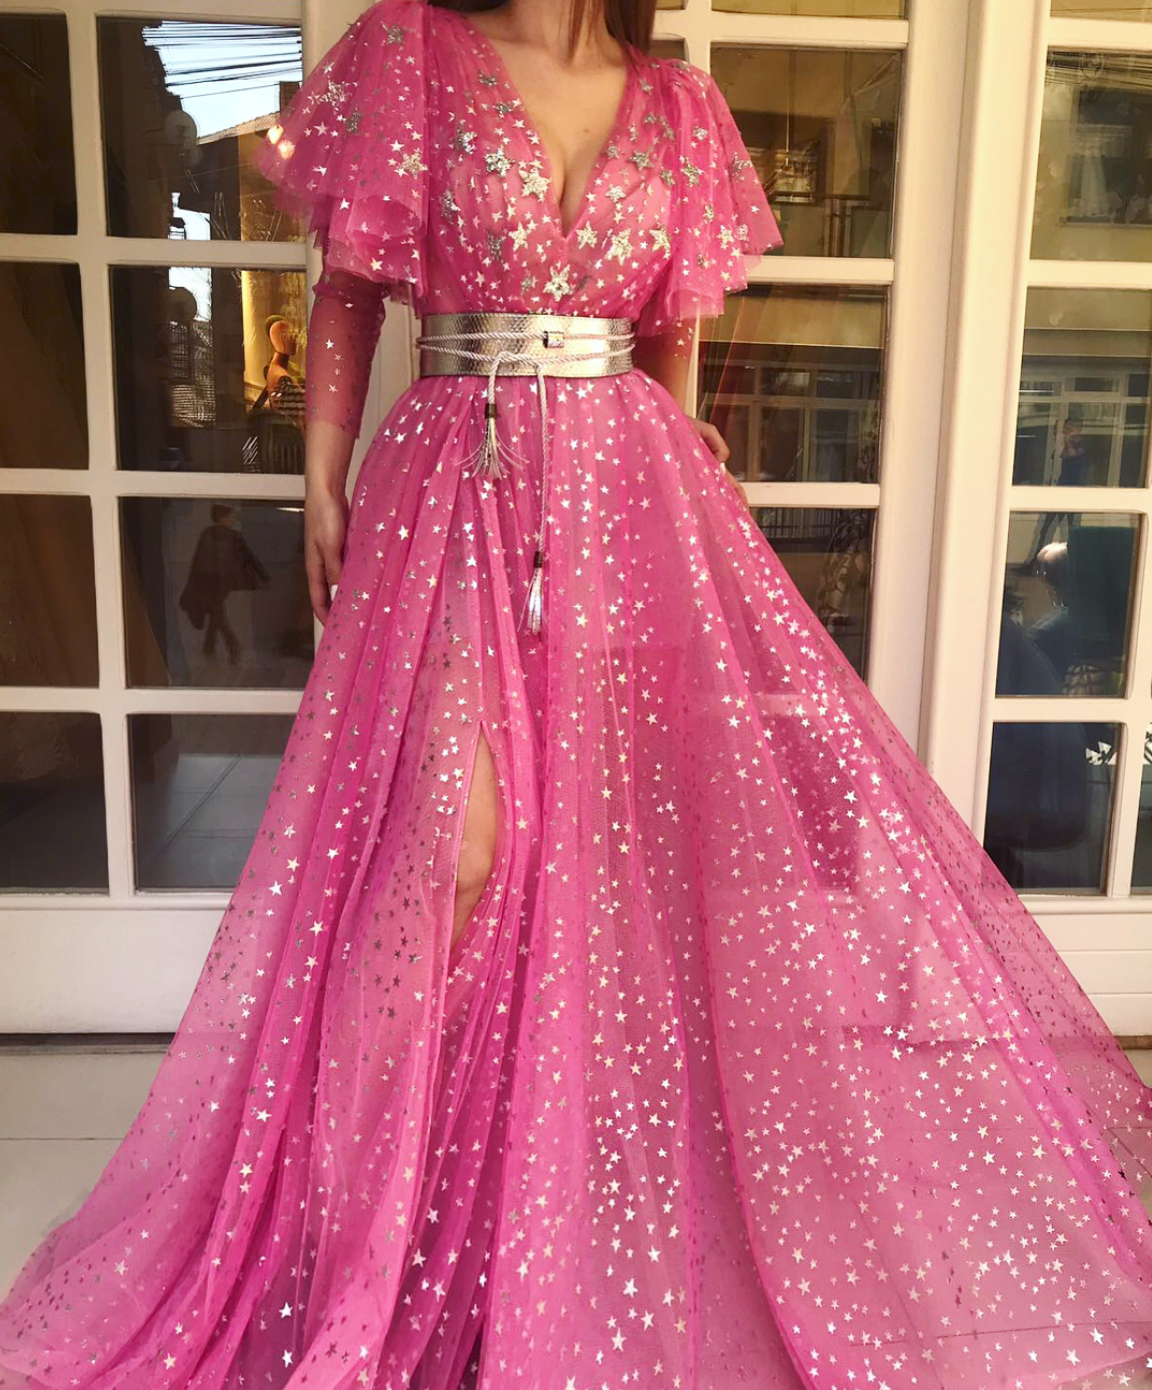 Pink A-Line dress with long sleeves, v-neck, belt and starry fabric